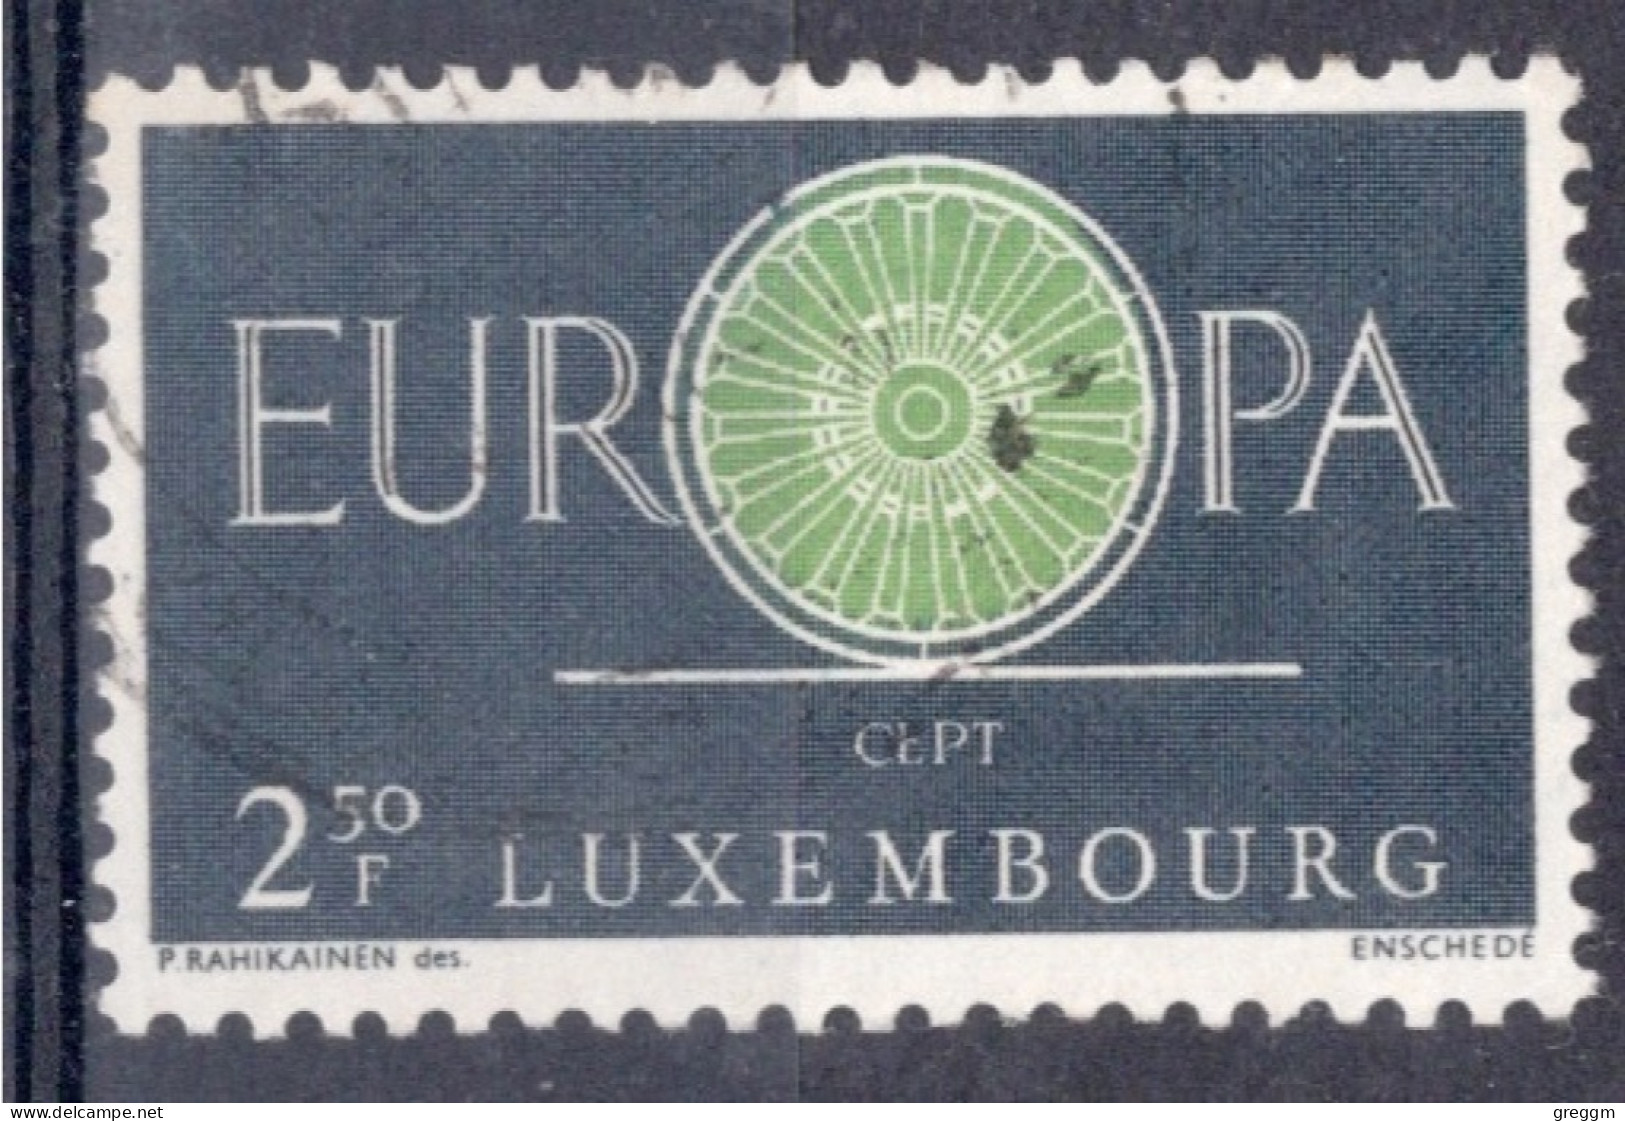 Luxembourg 1960  Single Stamp Issued To Celebrate EUROPA In Fine Used - Used Stamps